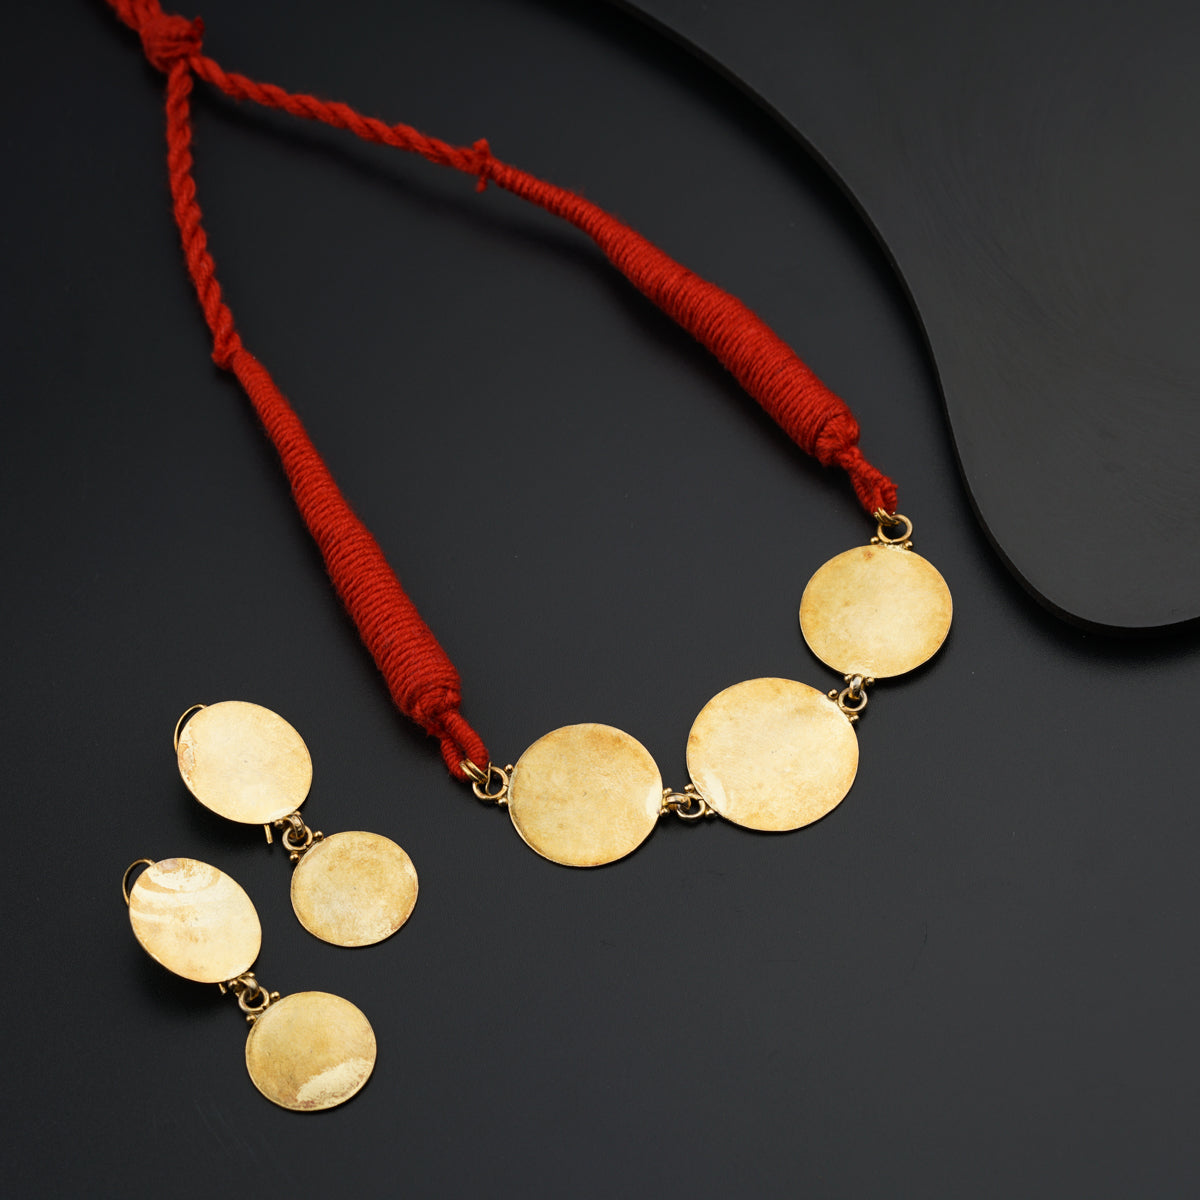 a necklace with five discs on a red cord